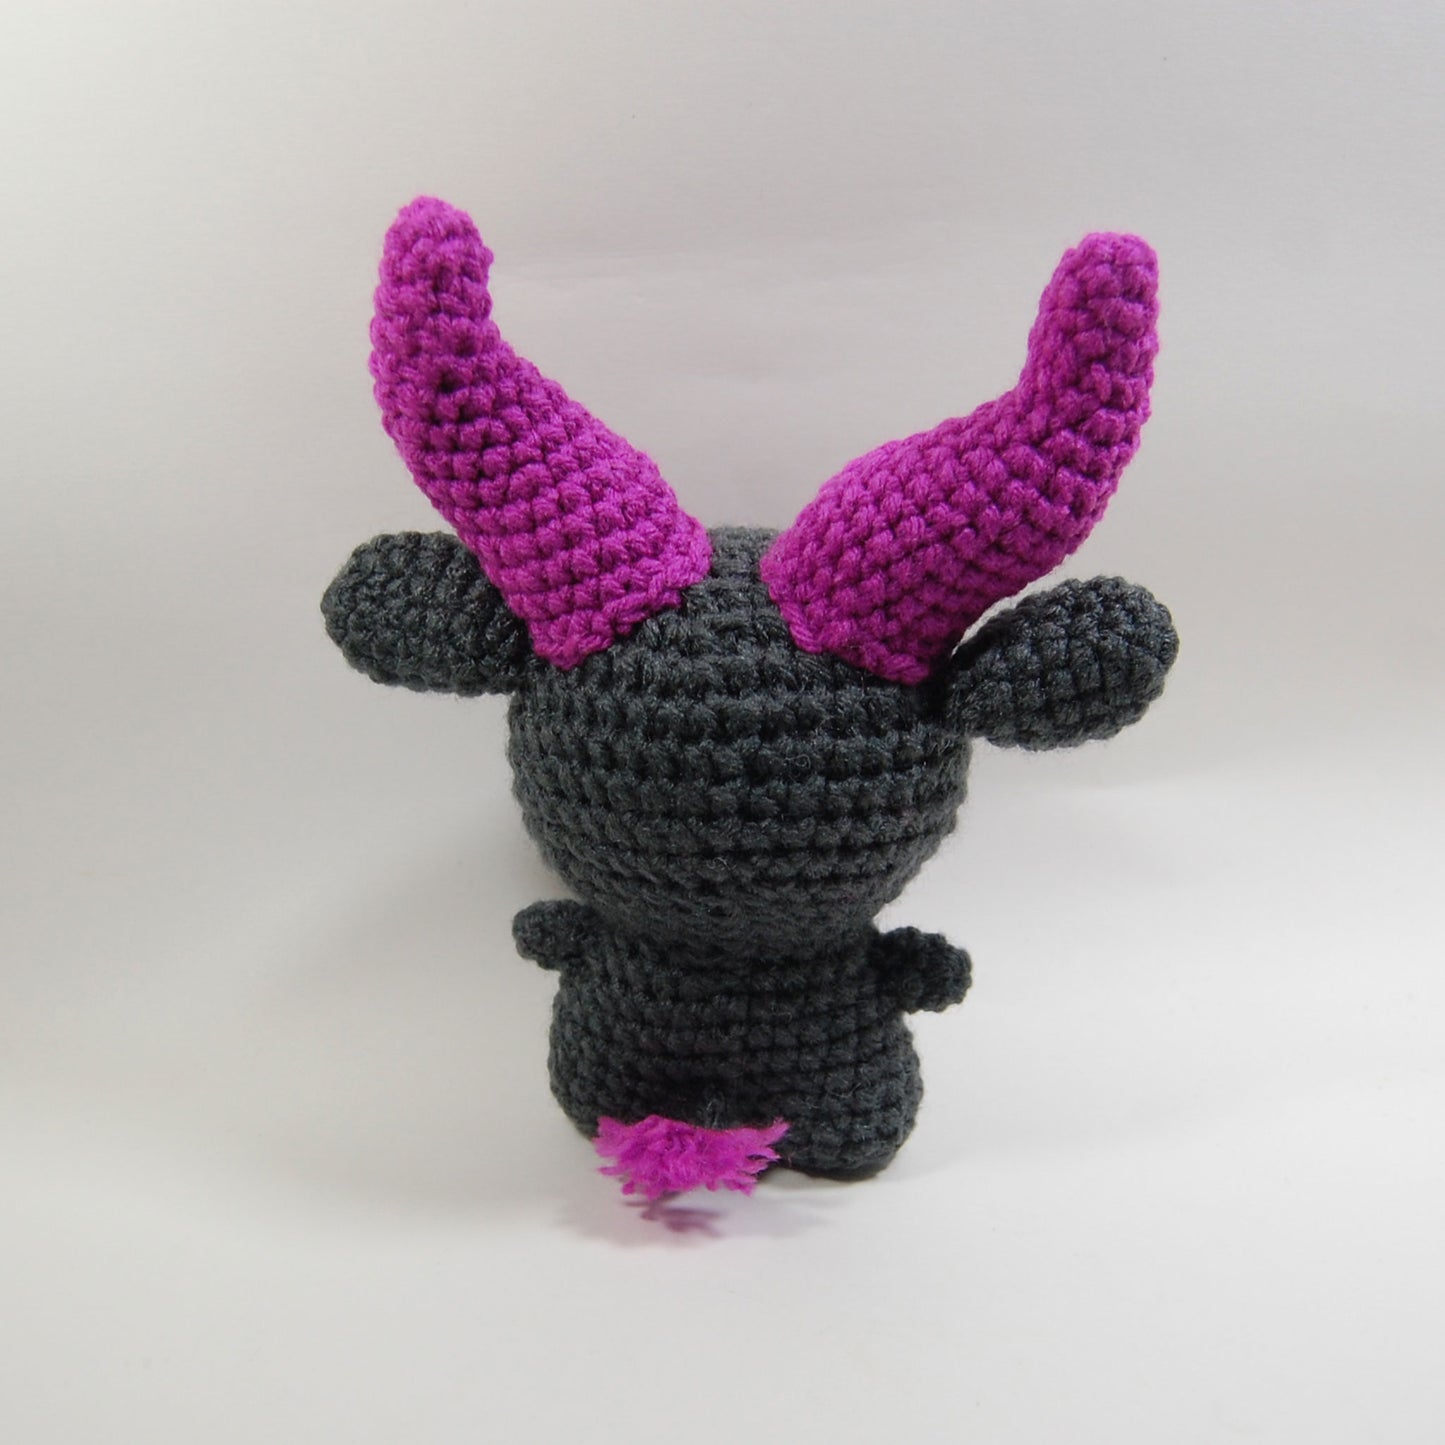 Baby Baphomet Crochet Pattern + Coloring Page